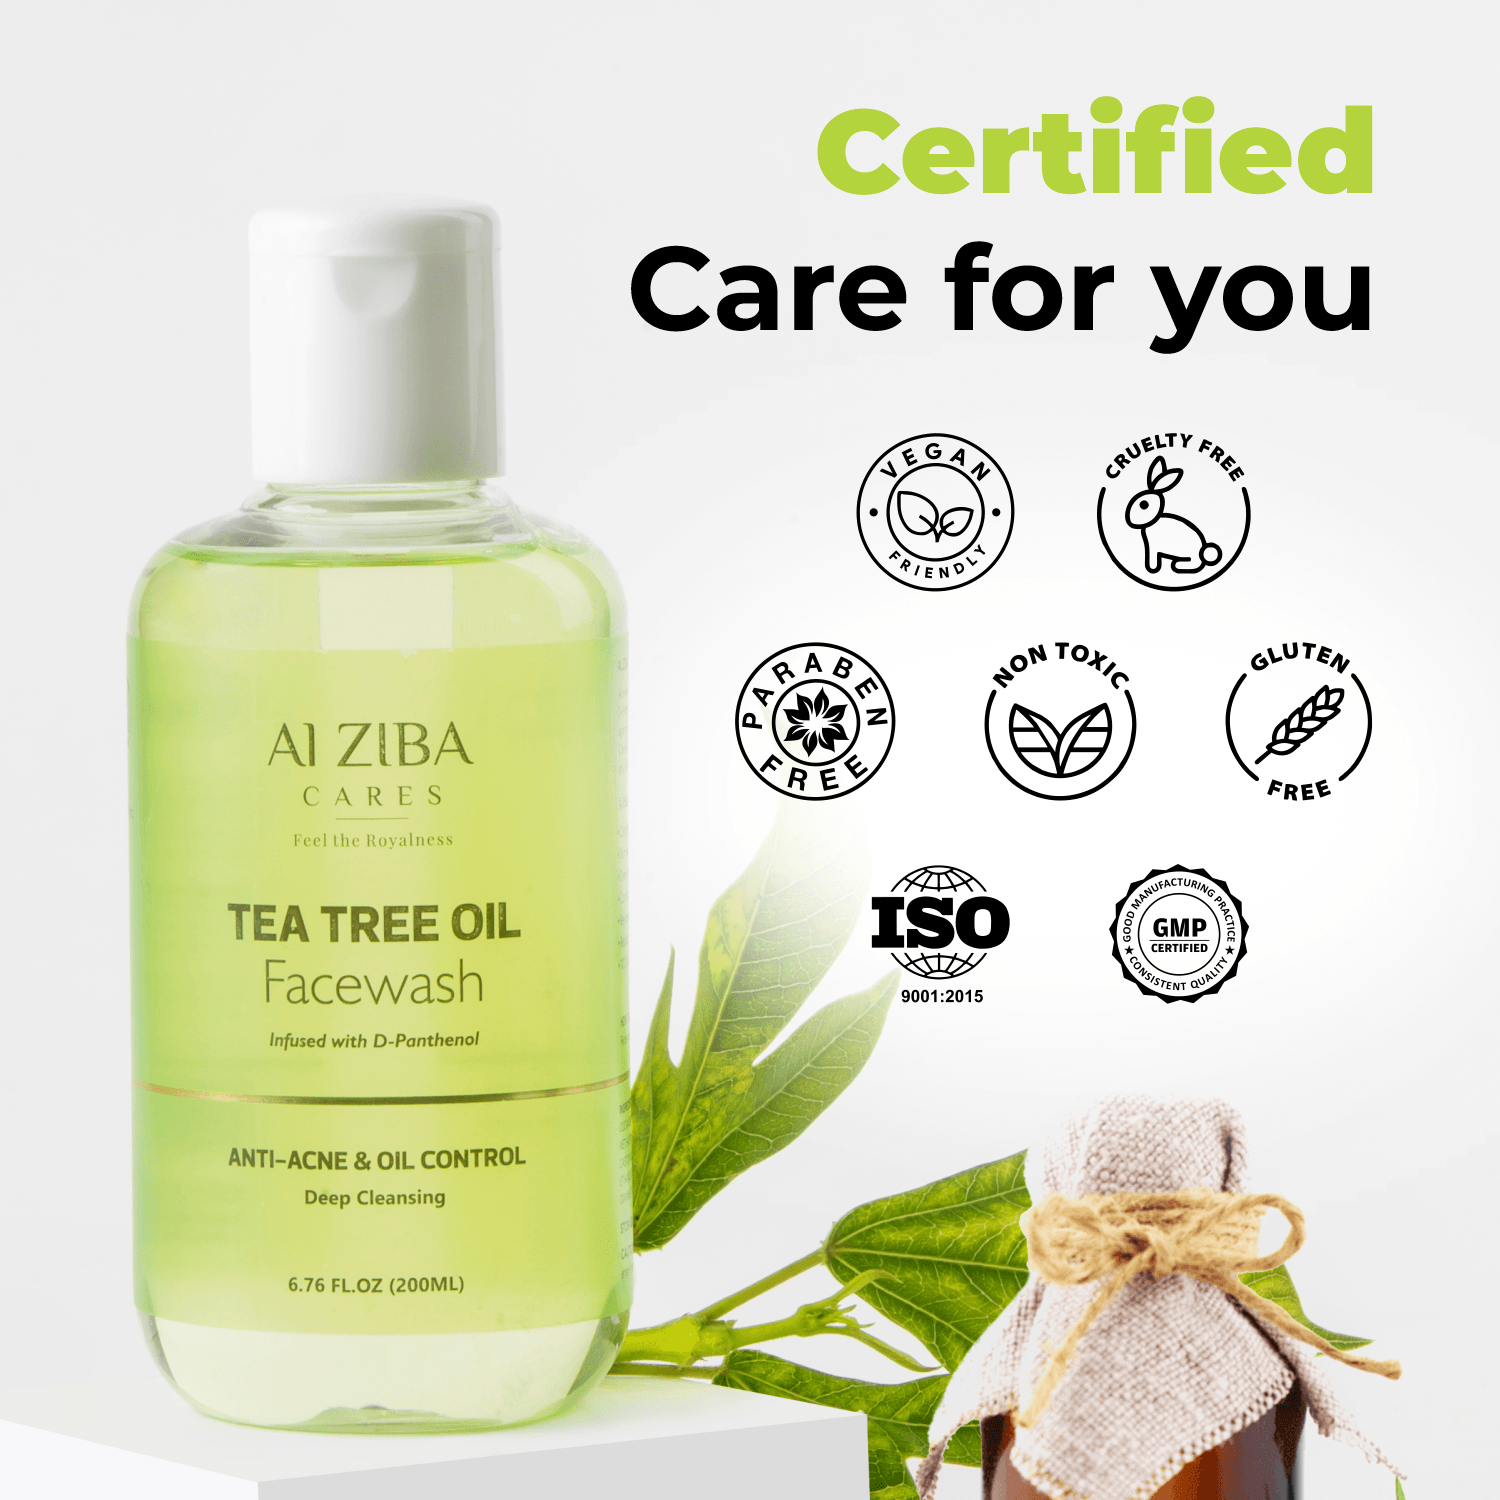 Tea Tree Oil Face Wash With D-Panthenol & Anti-acne, Oil Control & Deep Cleansing - 200 ML - ALZIBA CARES